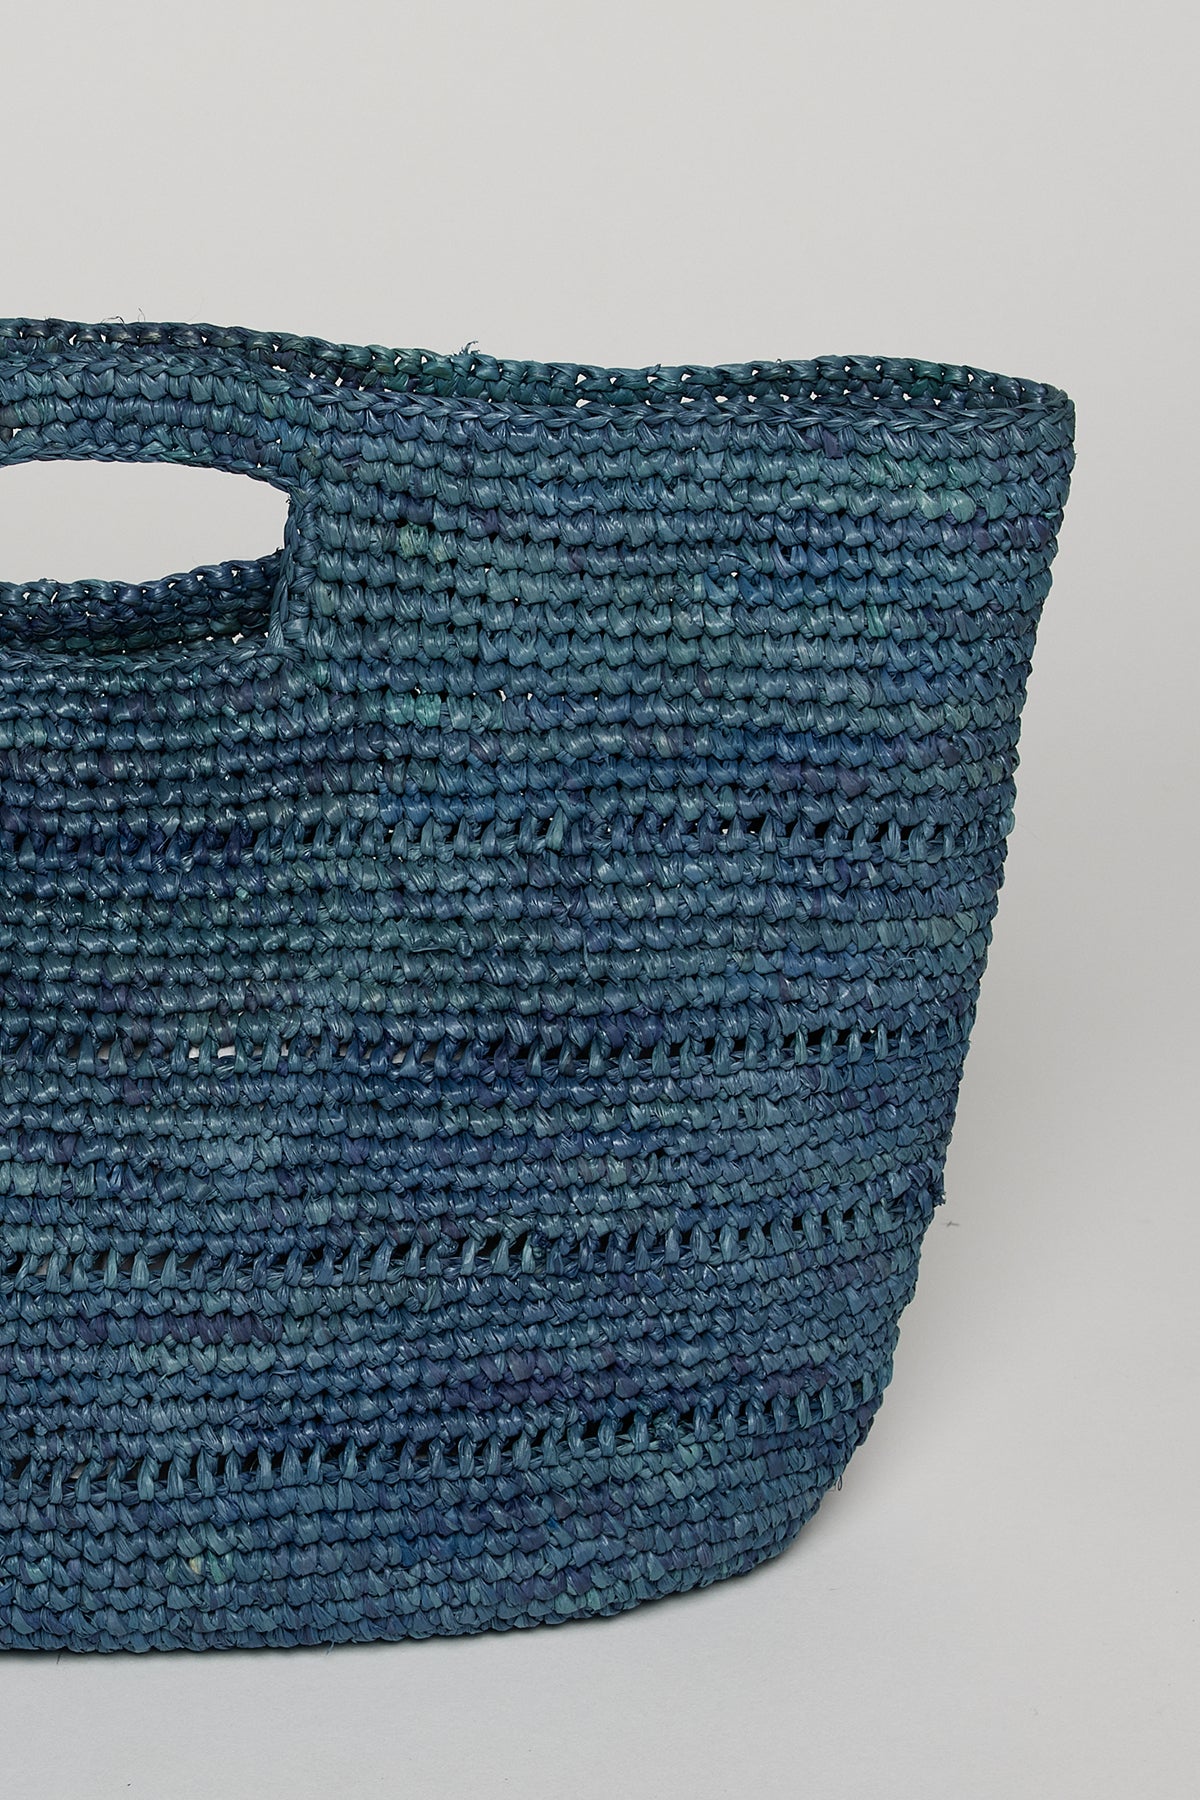   A close-up view of a textured, blue NAOMI HANDHELD STRAW BAG from Velvet by Graham & Spencer with a prominent handle. 